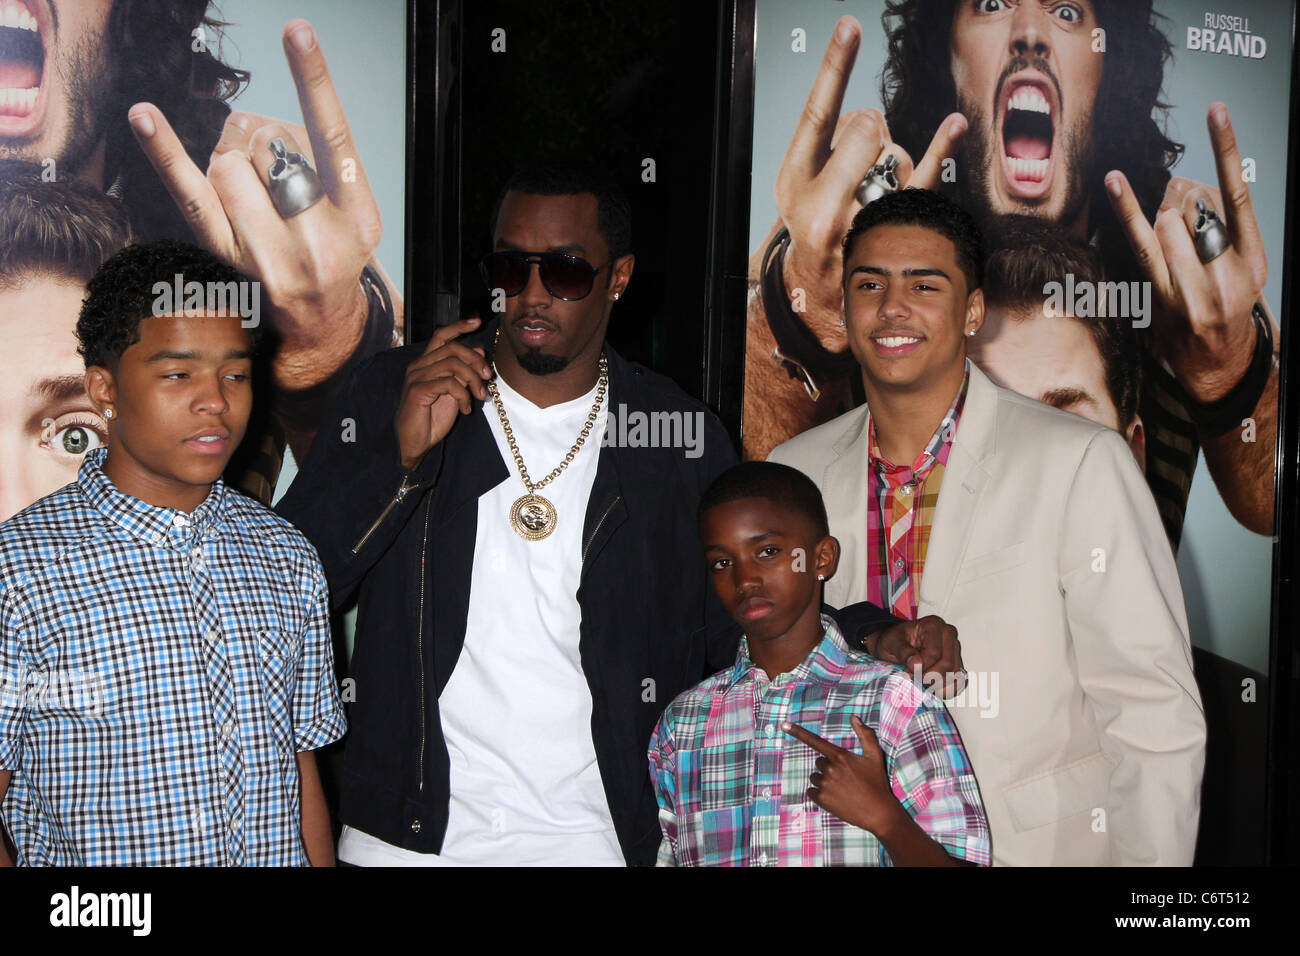 p diddy kids now